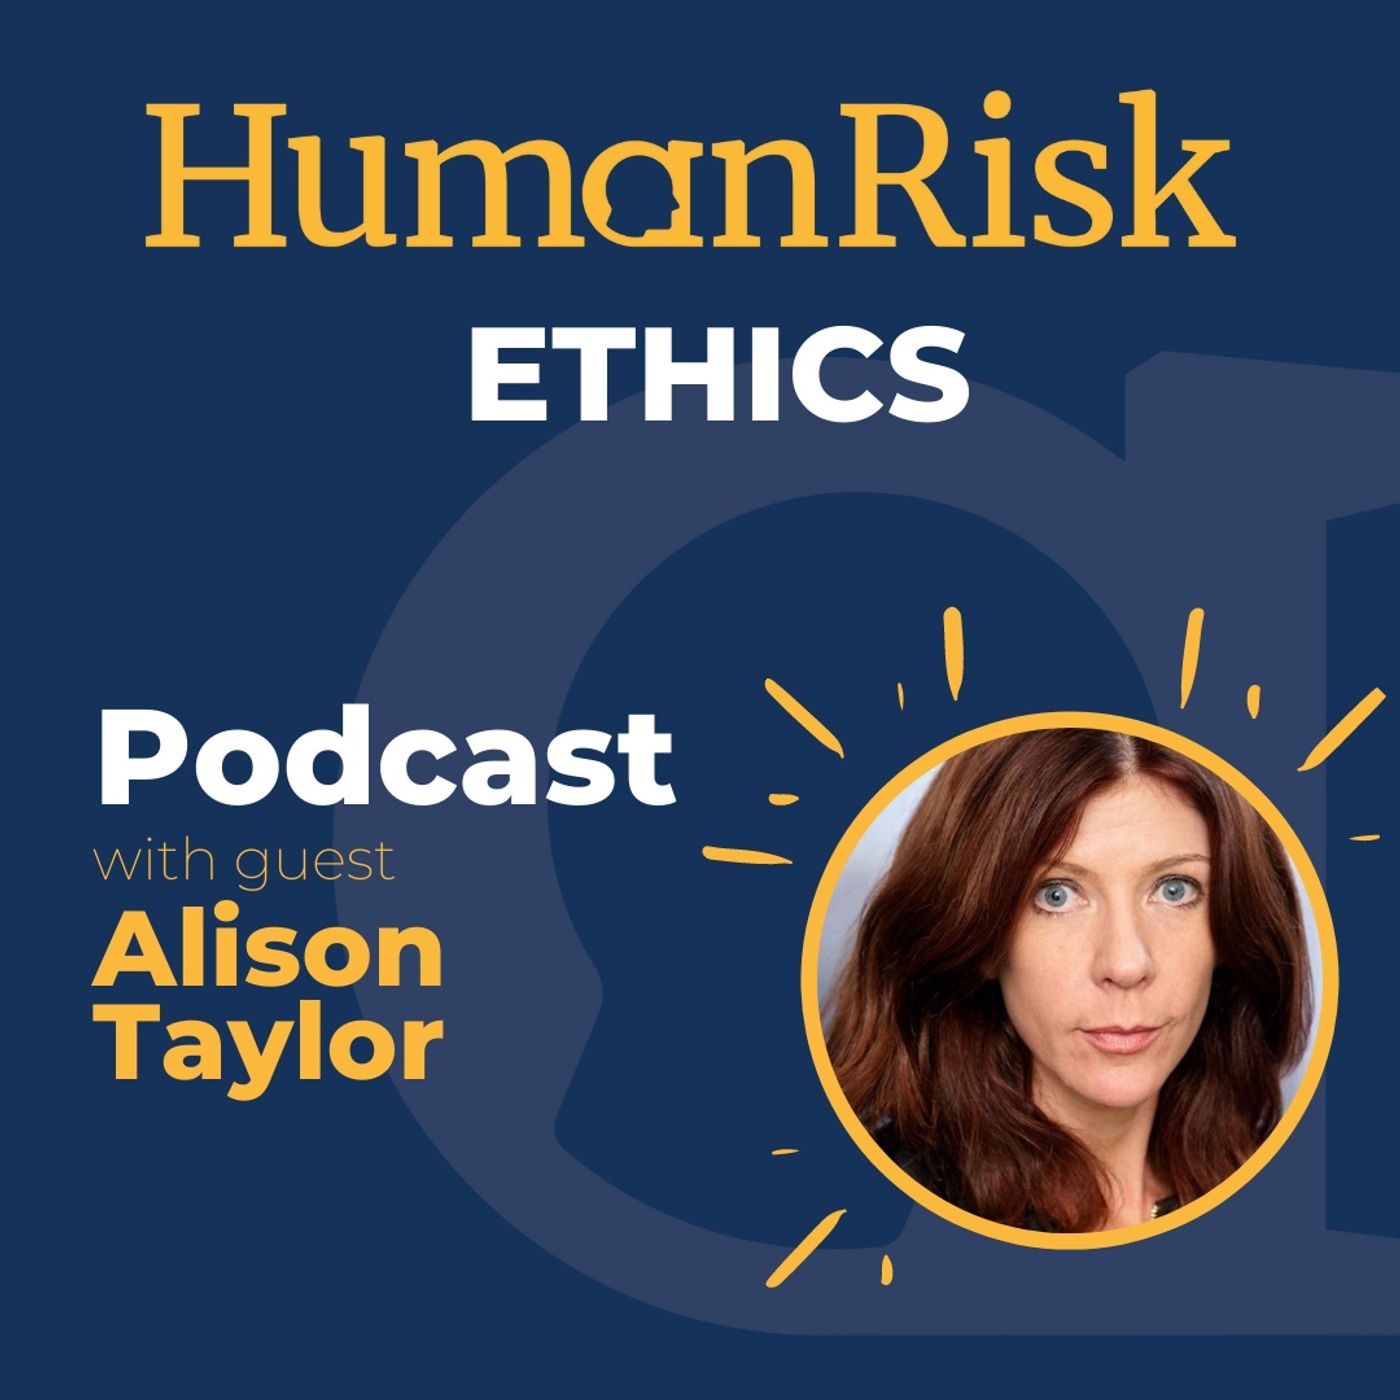 Alison Taylor on Ethics - what is it & why does it matter?